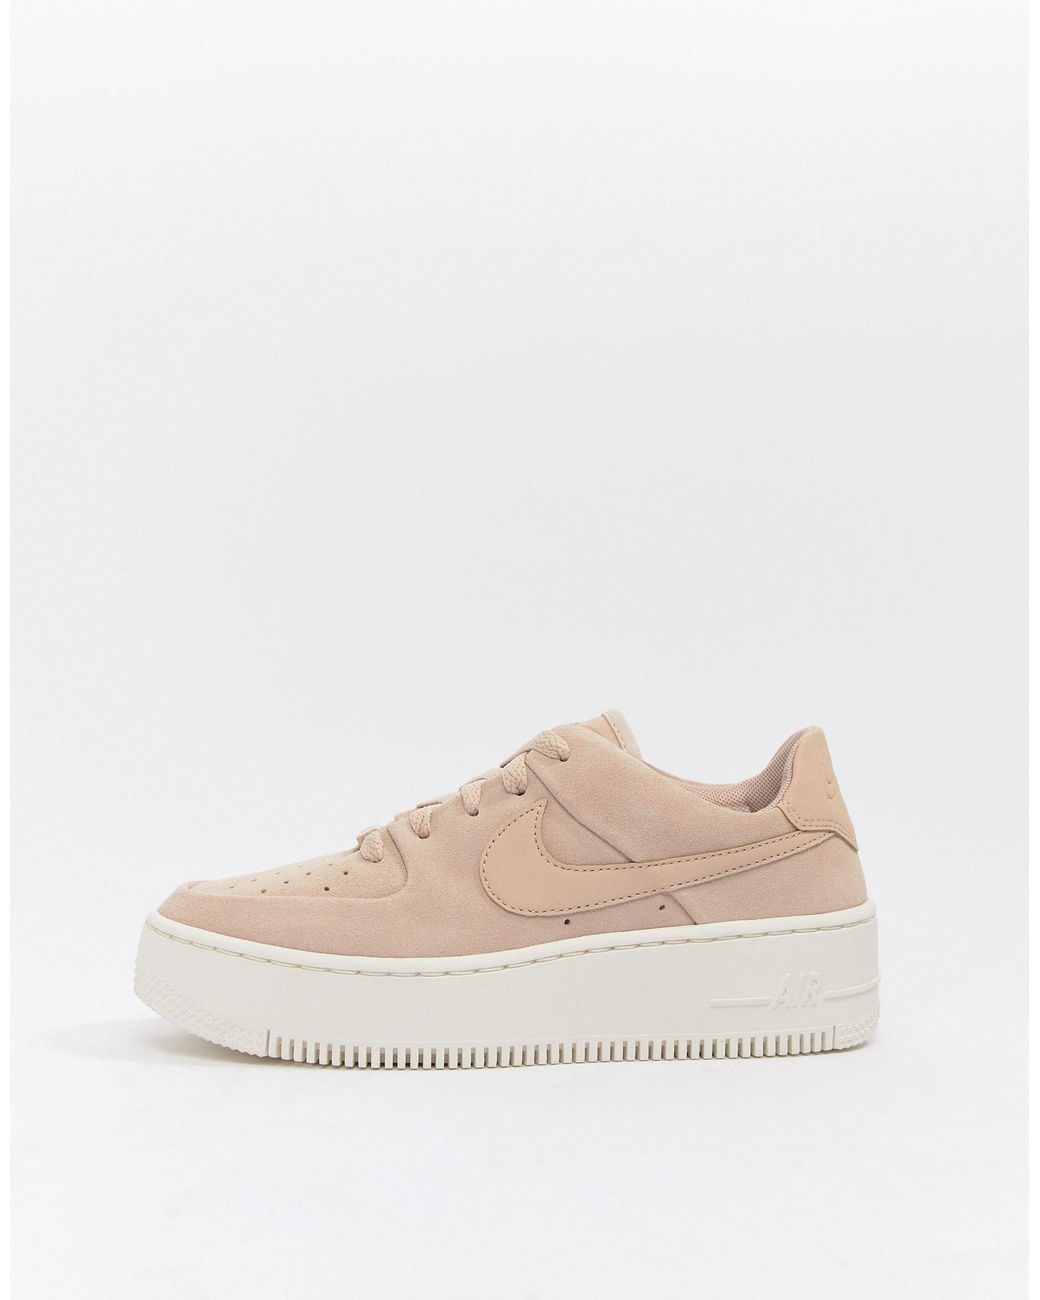 Nike Air Force 1 Pixel Shoe in Natural | Lyst Canada